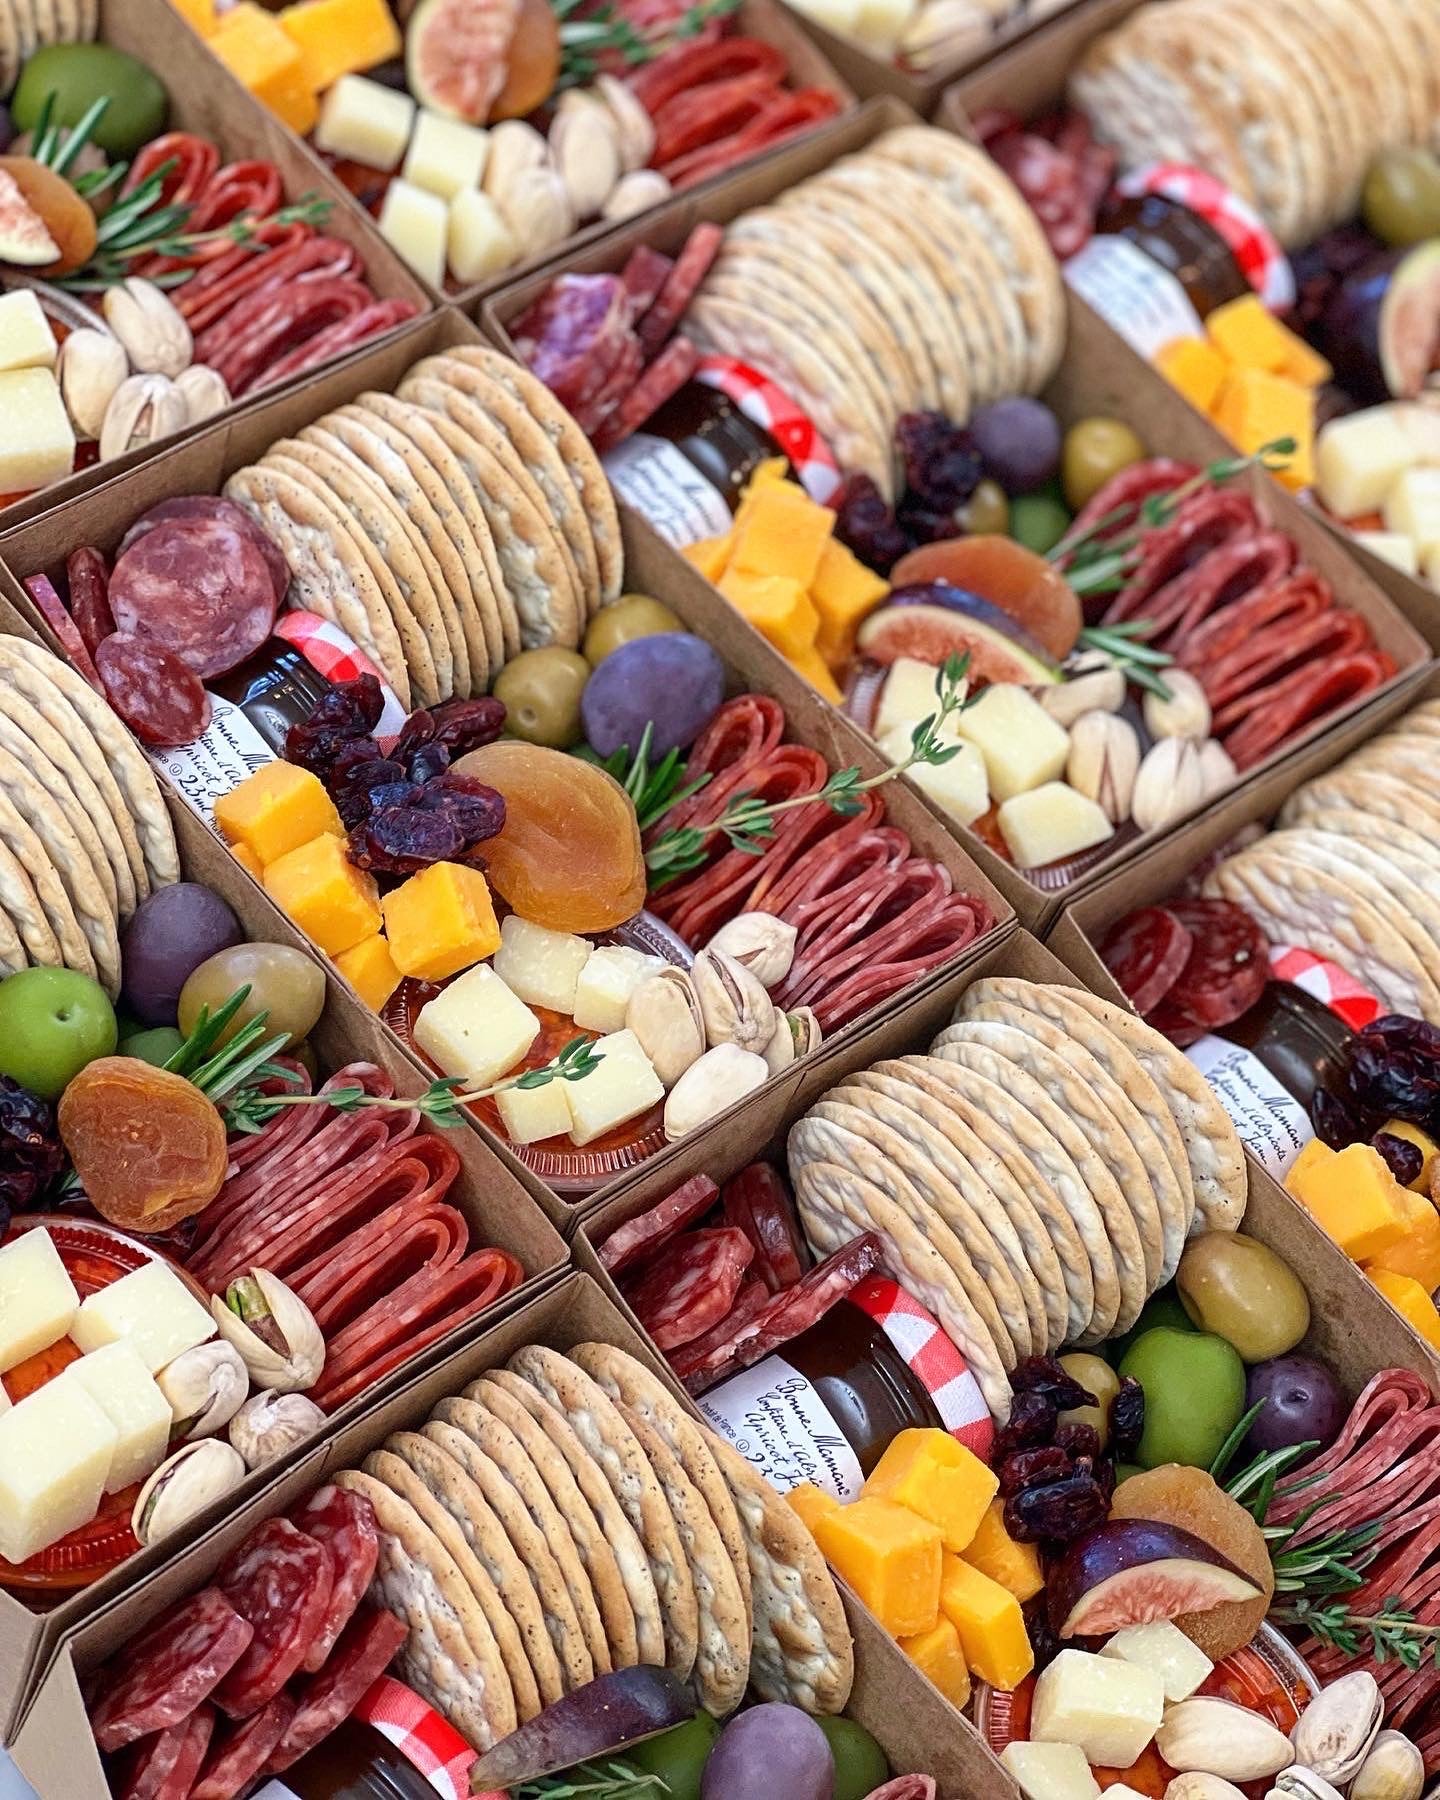 Charcuterie-Toronto-Corporate Careting-Best Gifts-Cured Catering